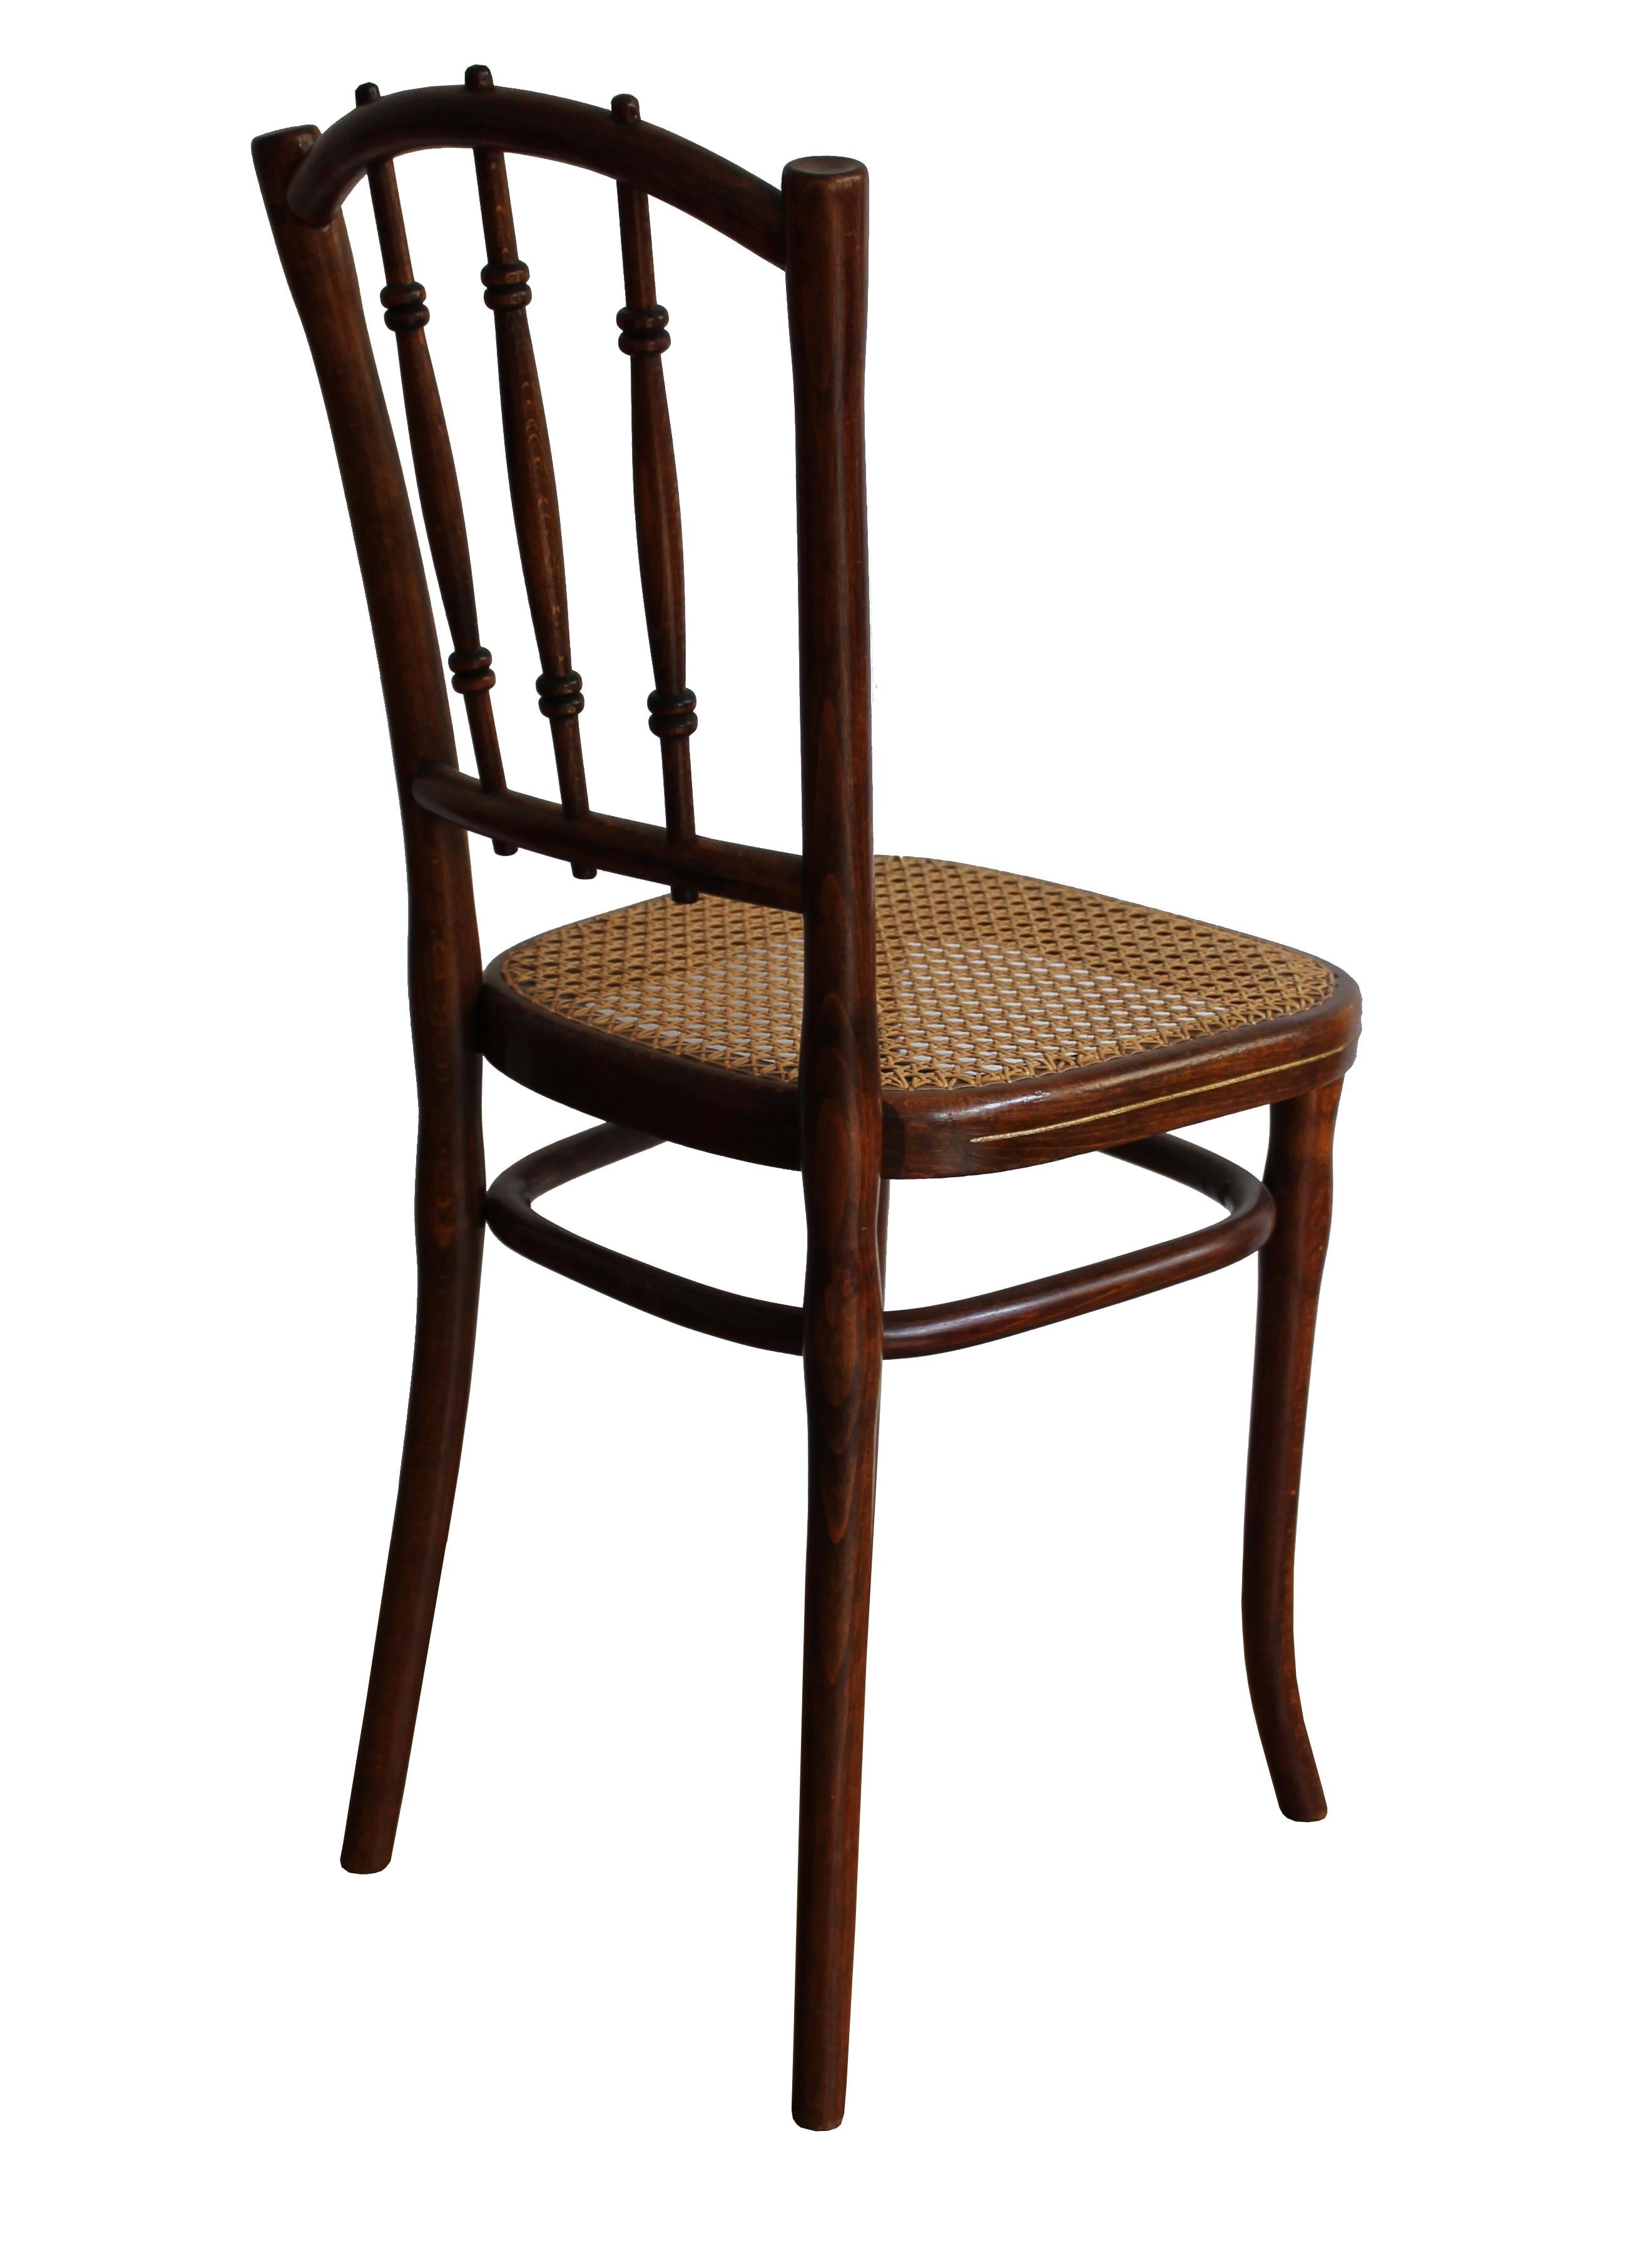 A pair of rare dining chairs produced by Thonet Austria circa 1910.
These bentwood dining chairs have a beautiful 